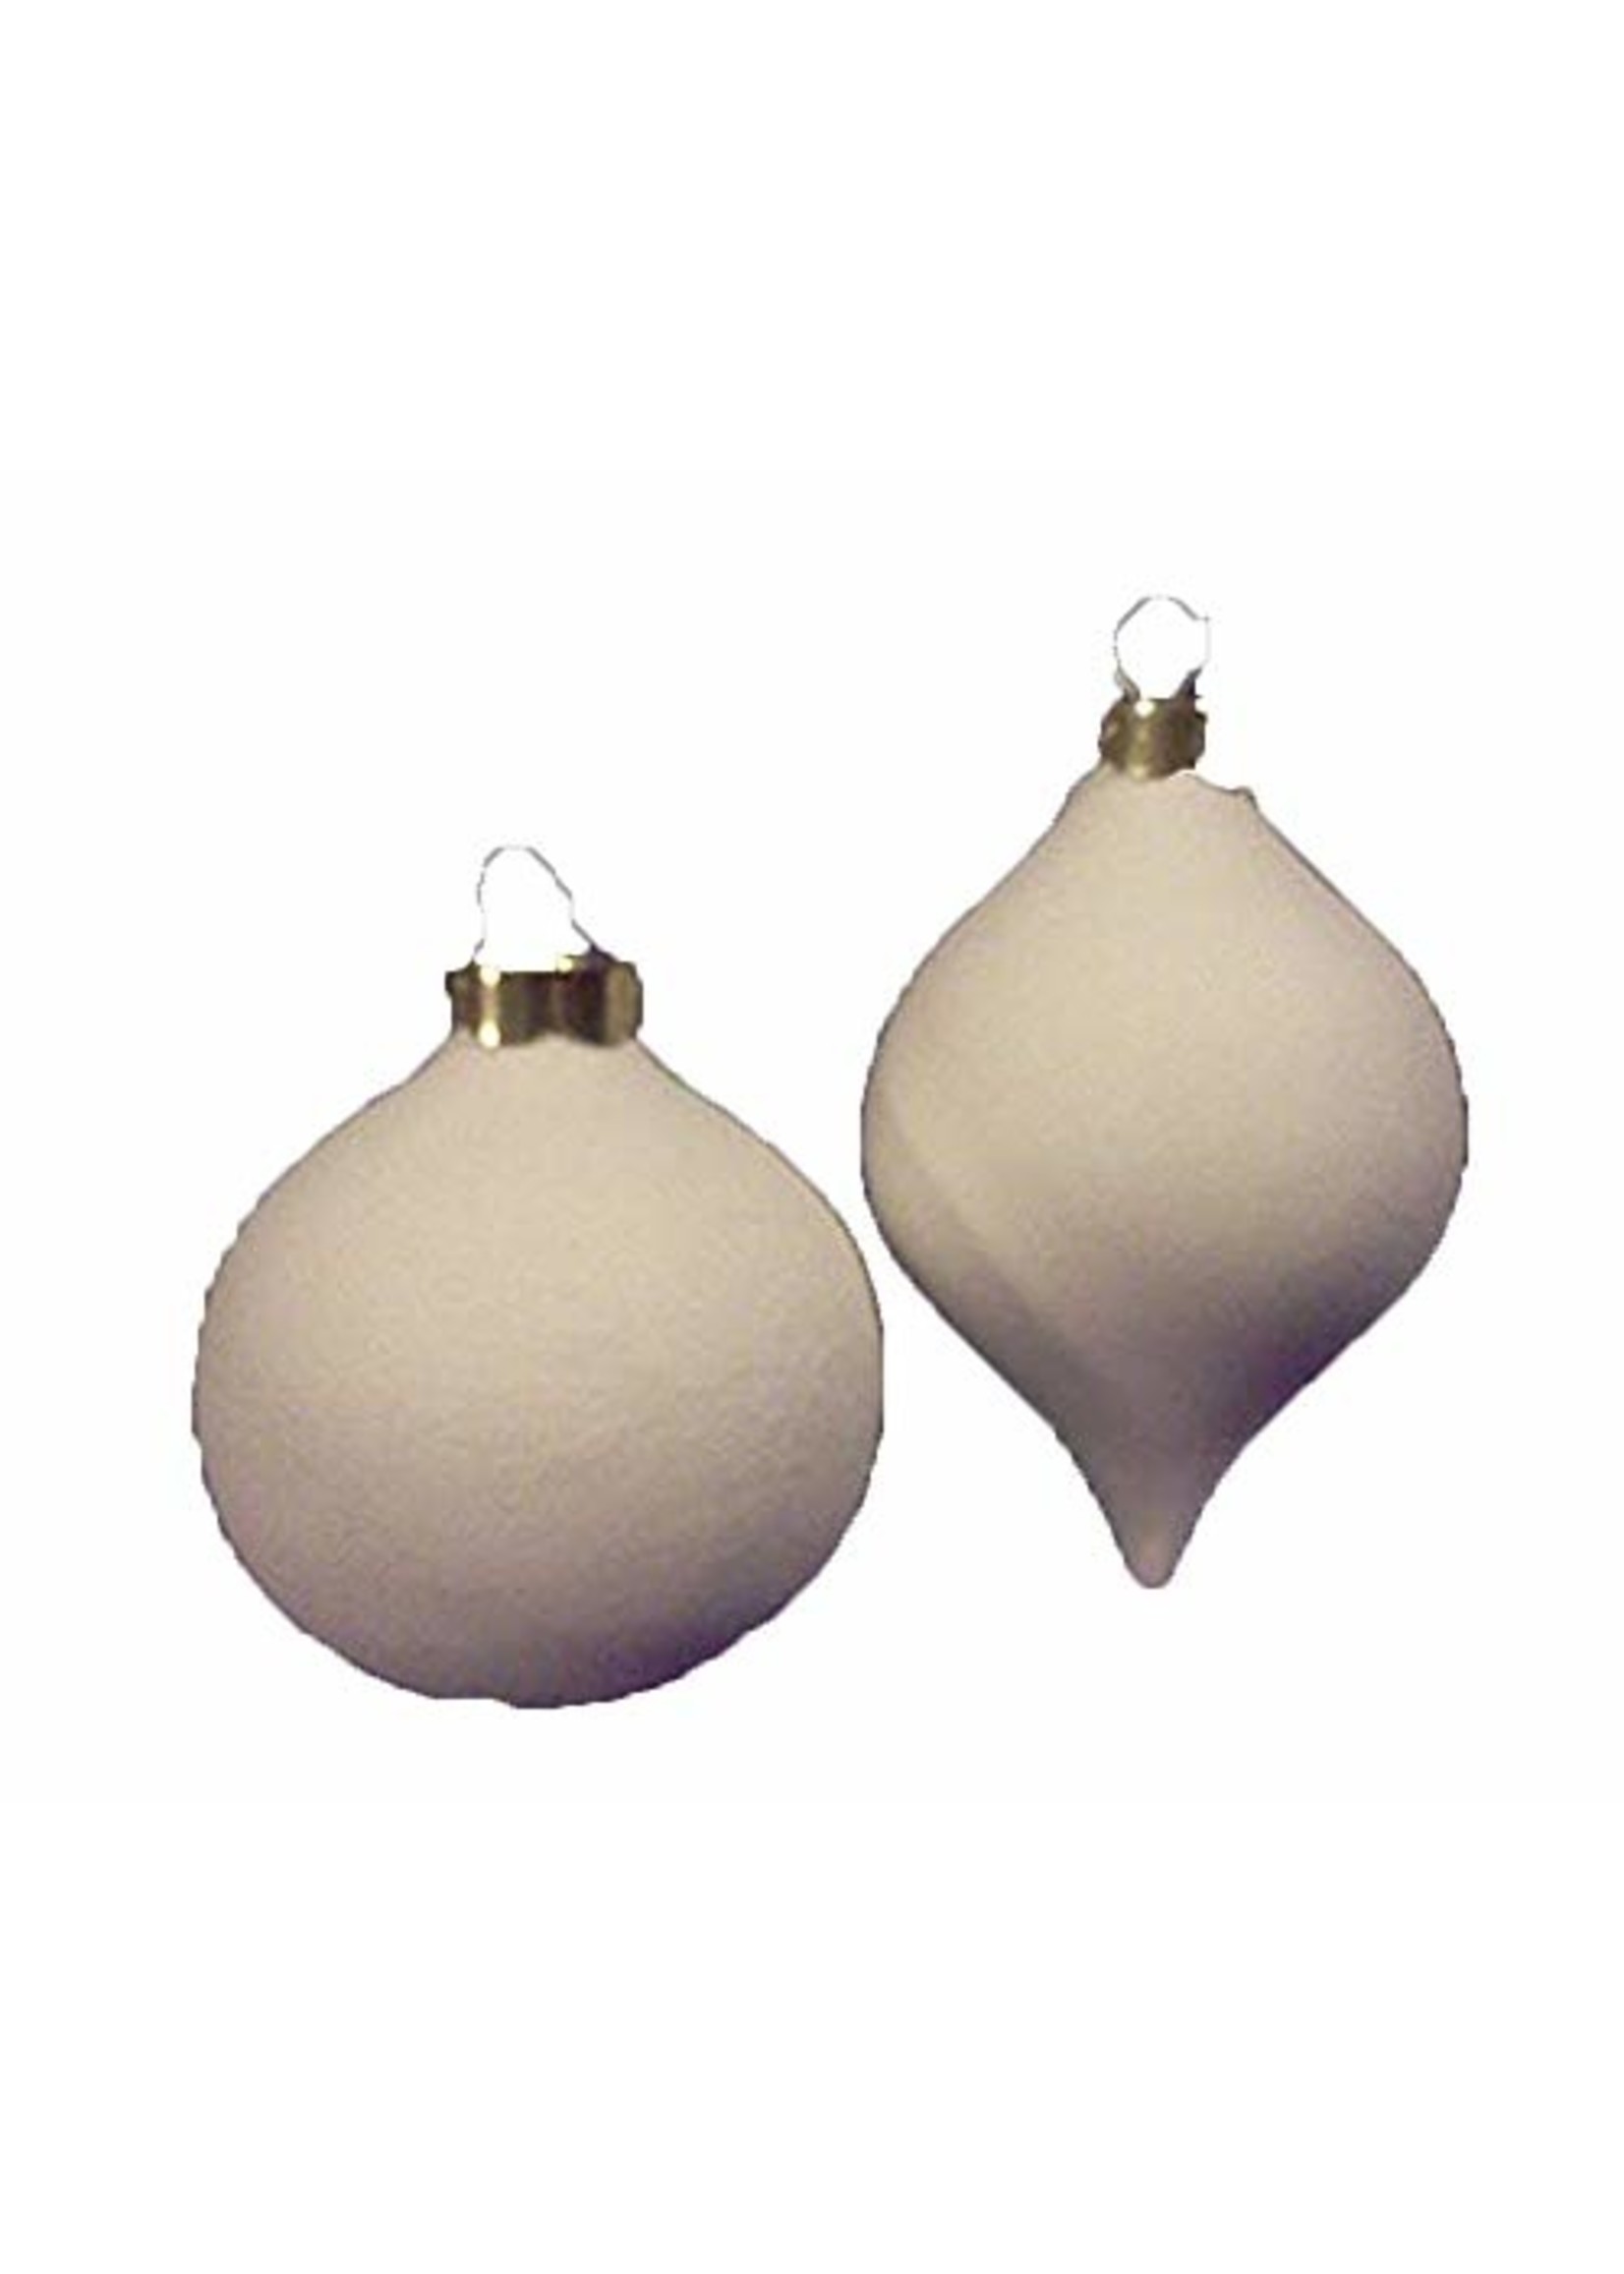 Creative Kreations Ceramics and Gifts Create Your own Ornaments 3 Set of 2  Ceramic Bisque, Ready to Paint